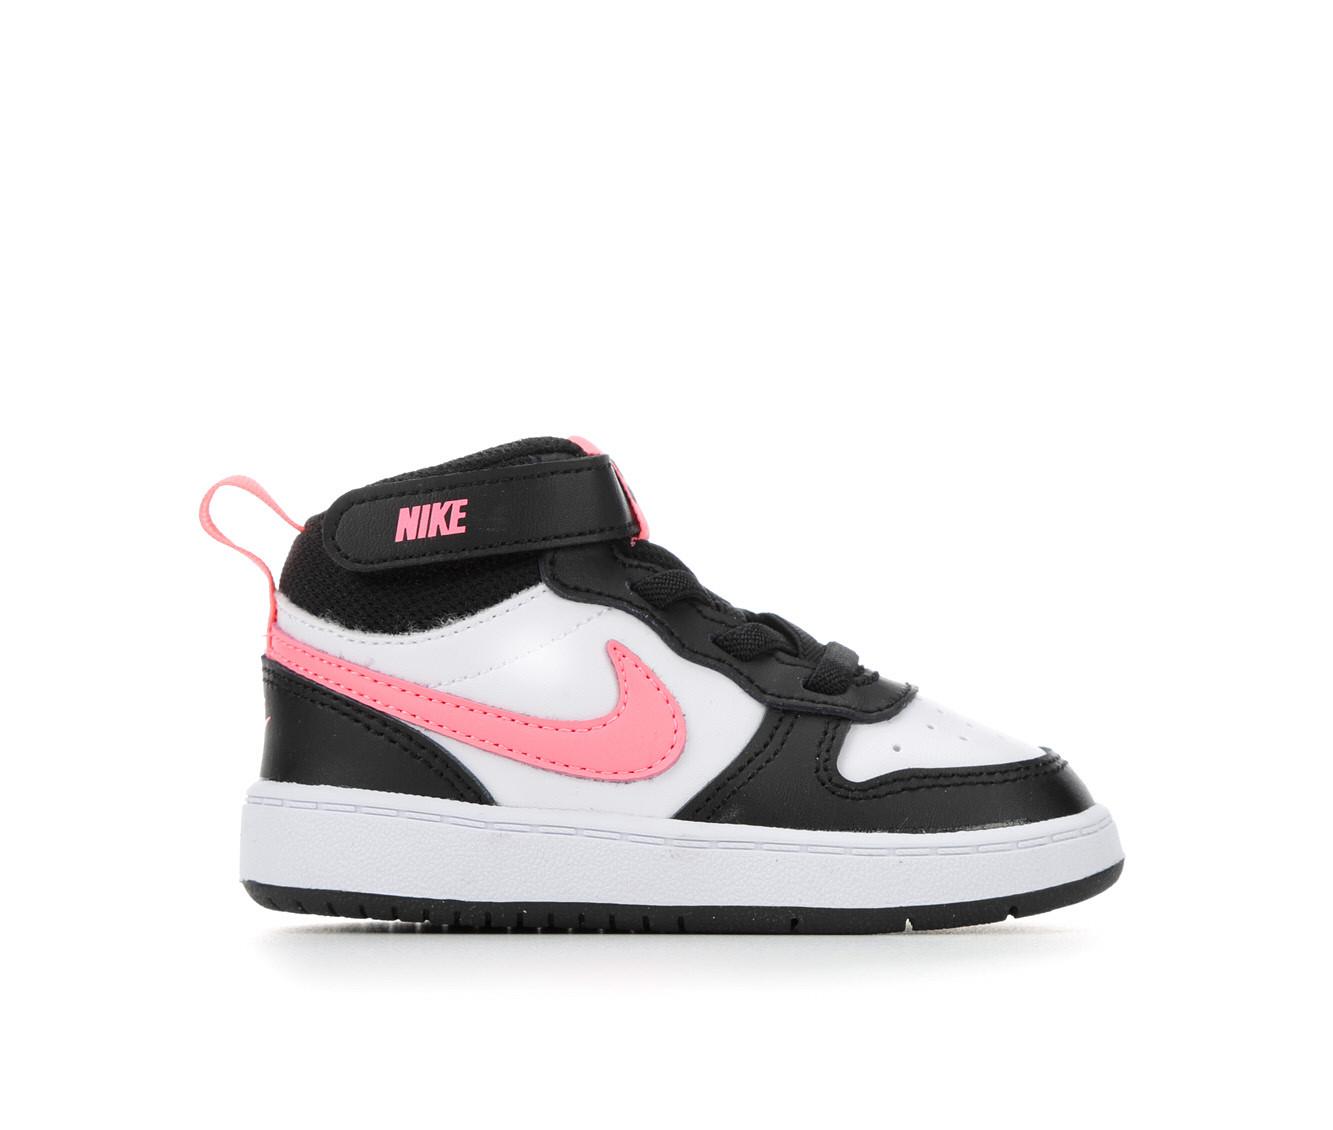 Girls' Nike Infant & Toddler Court Mid Sneakers